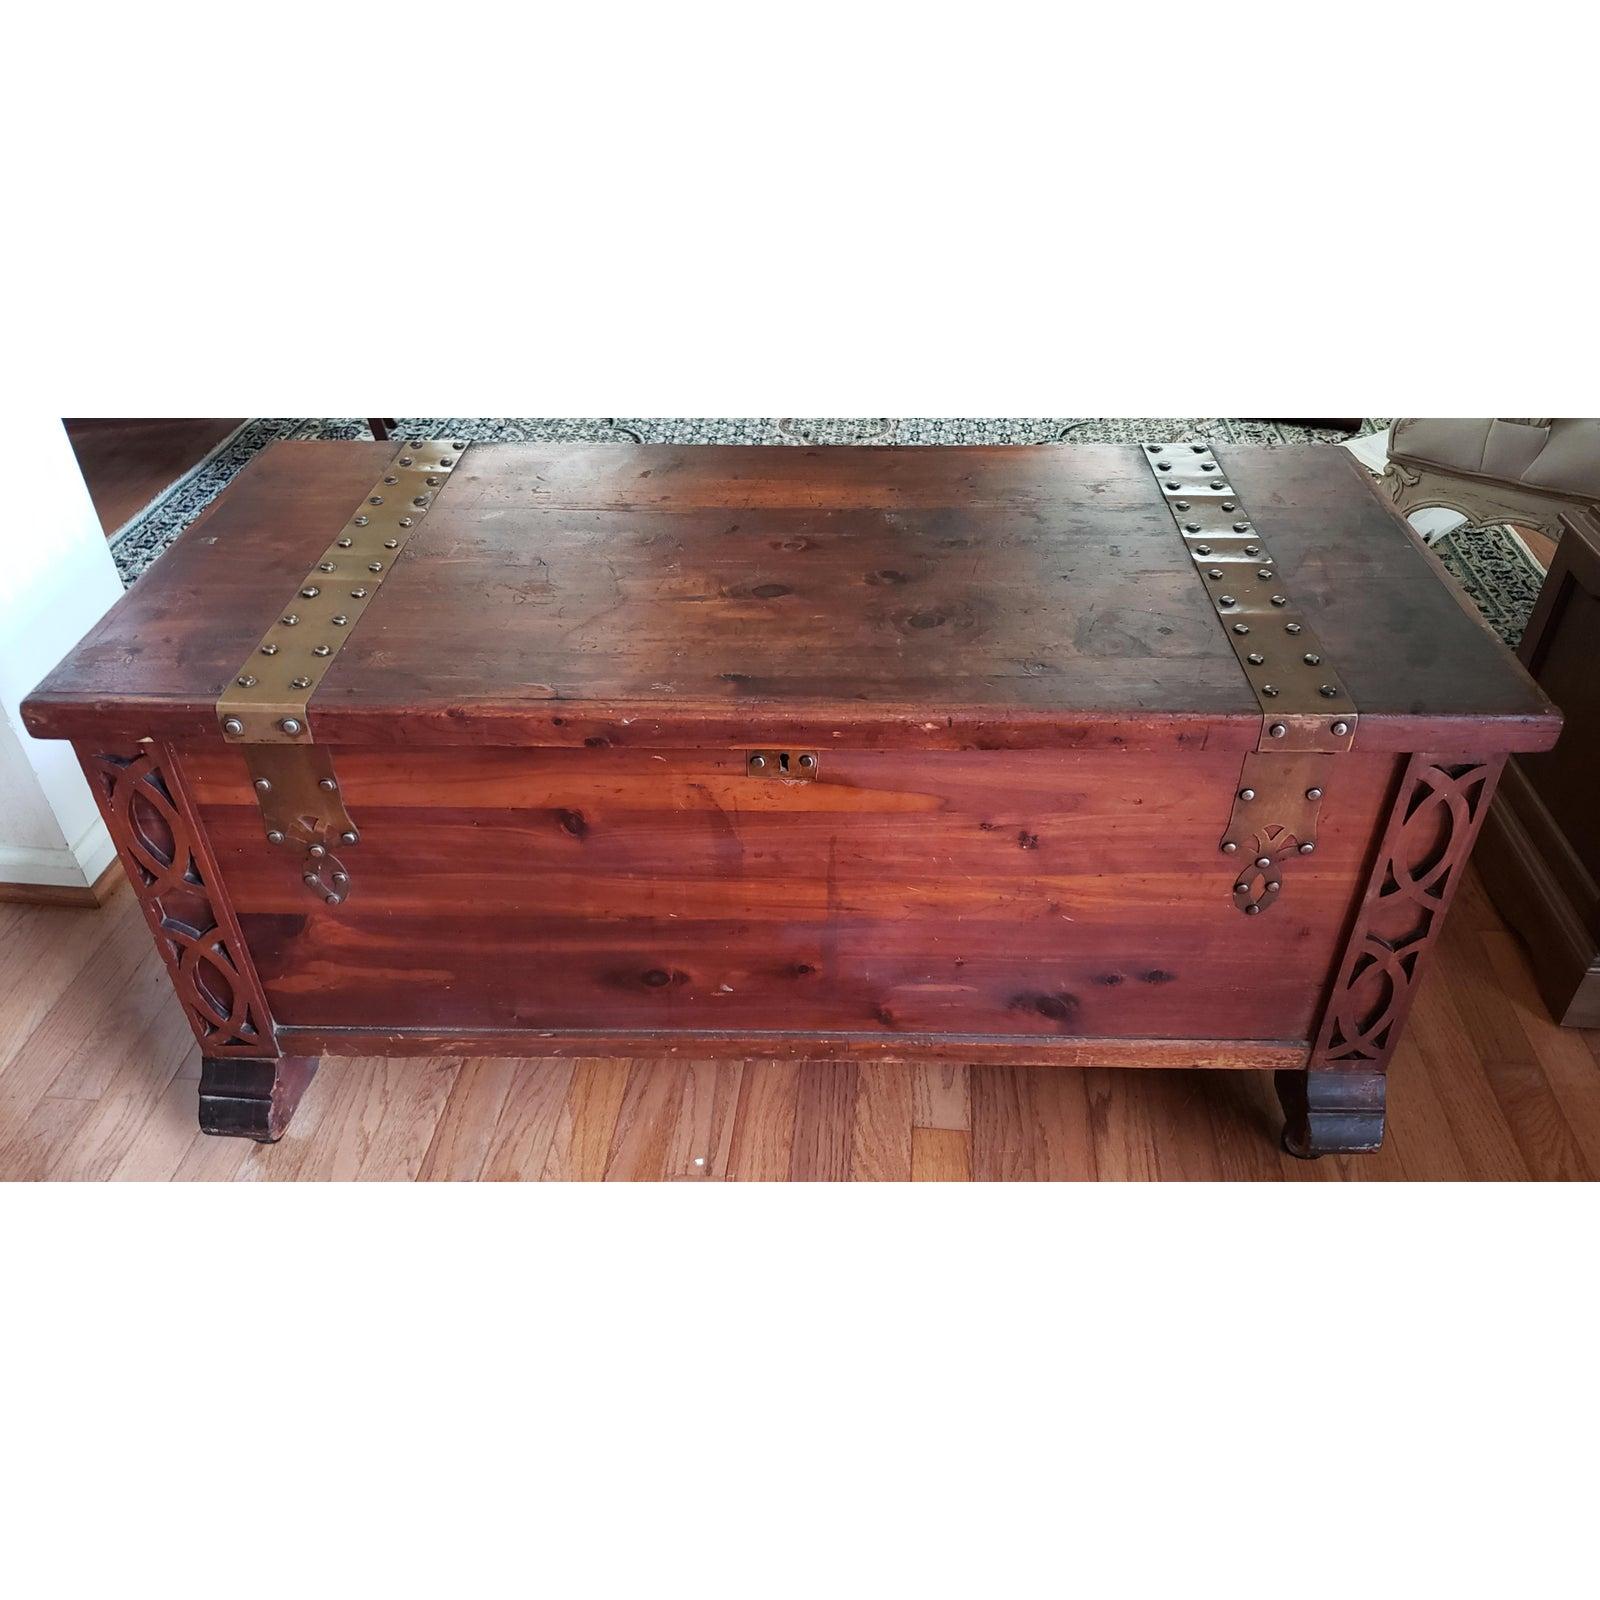 19th century antique Ornate Norway Pine wood / Red pine wood Blanket Cedar Chest on Wheels. Key non functional. Brand name, but sticker no longer clearly legible. Measurements are 42.75